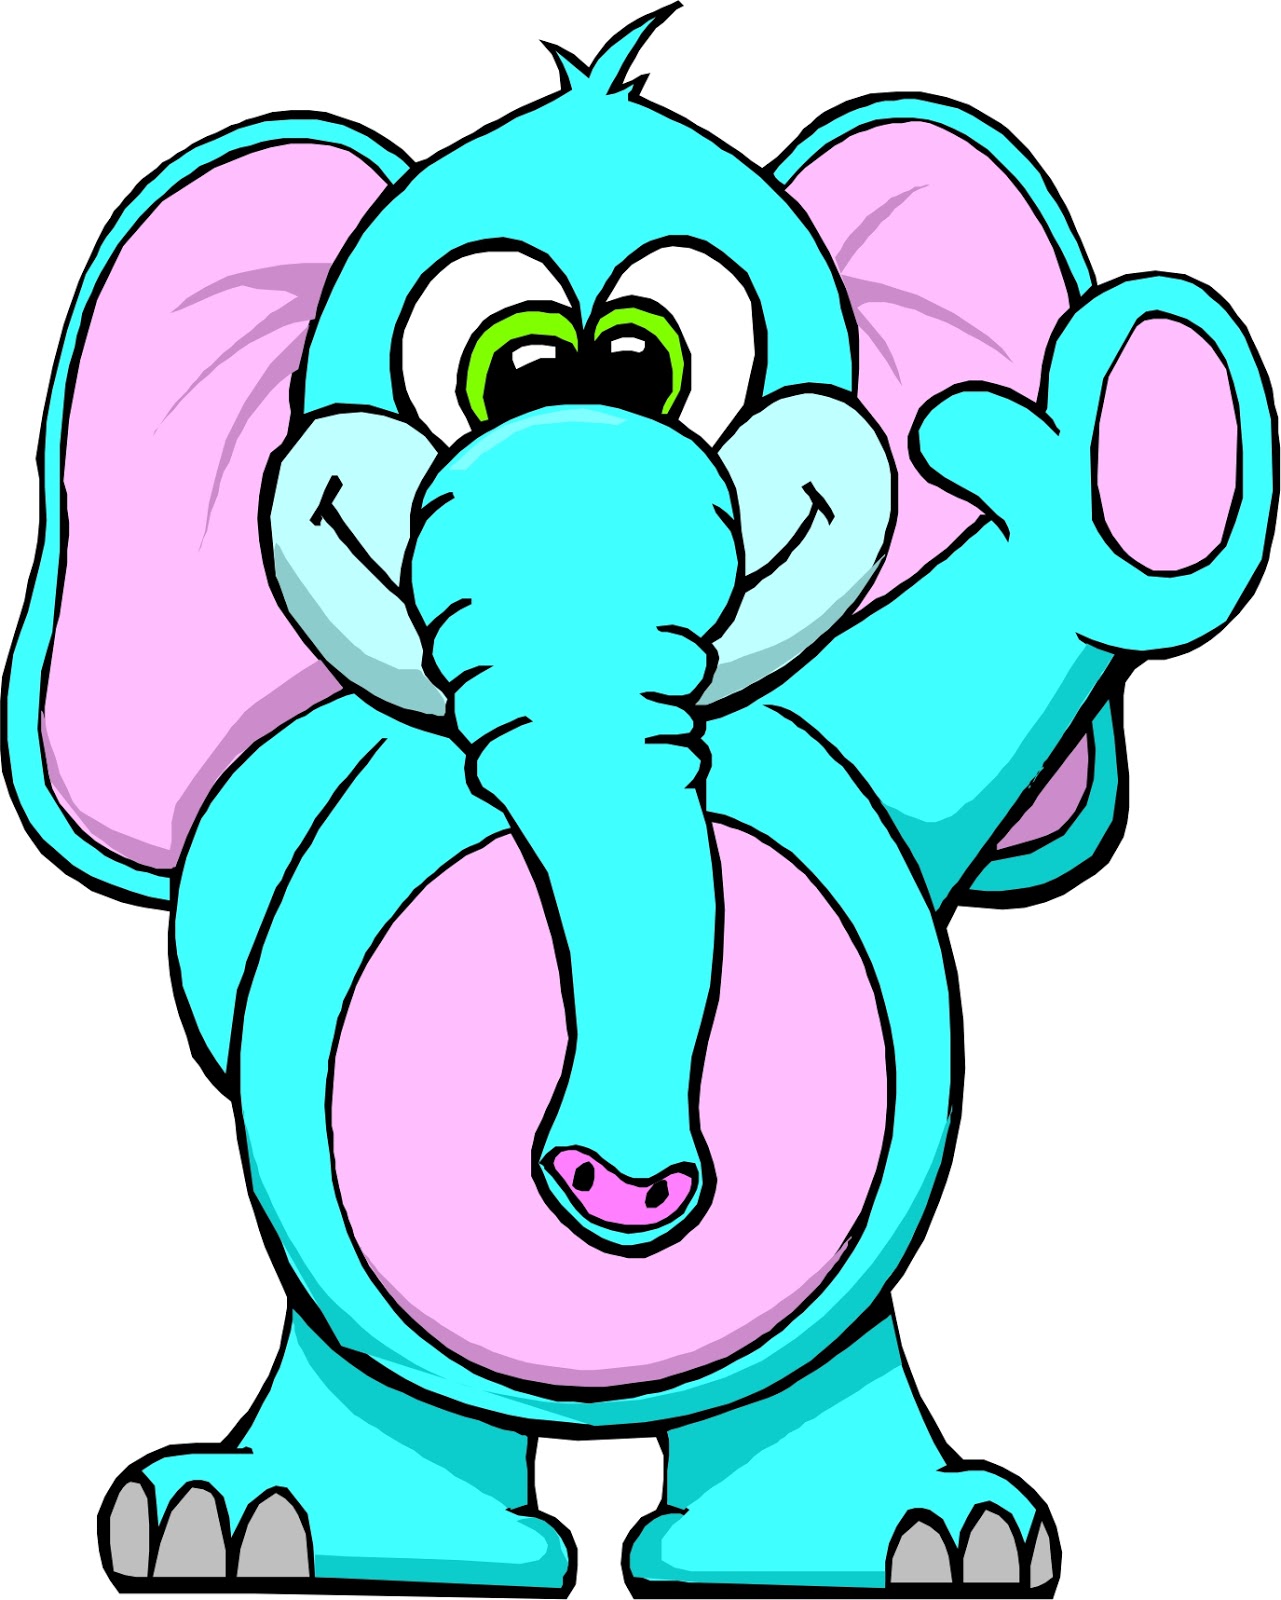 elephant-images-for-kids-cliparts-co